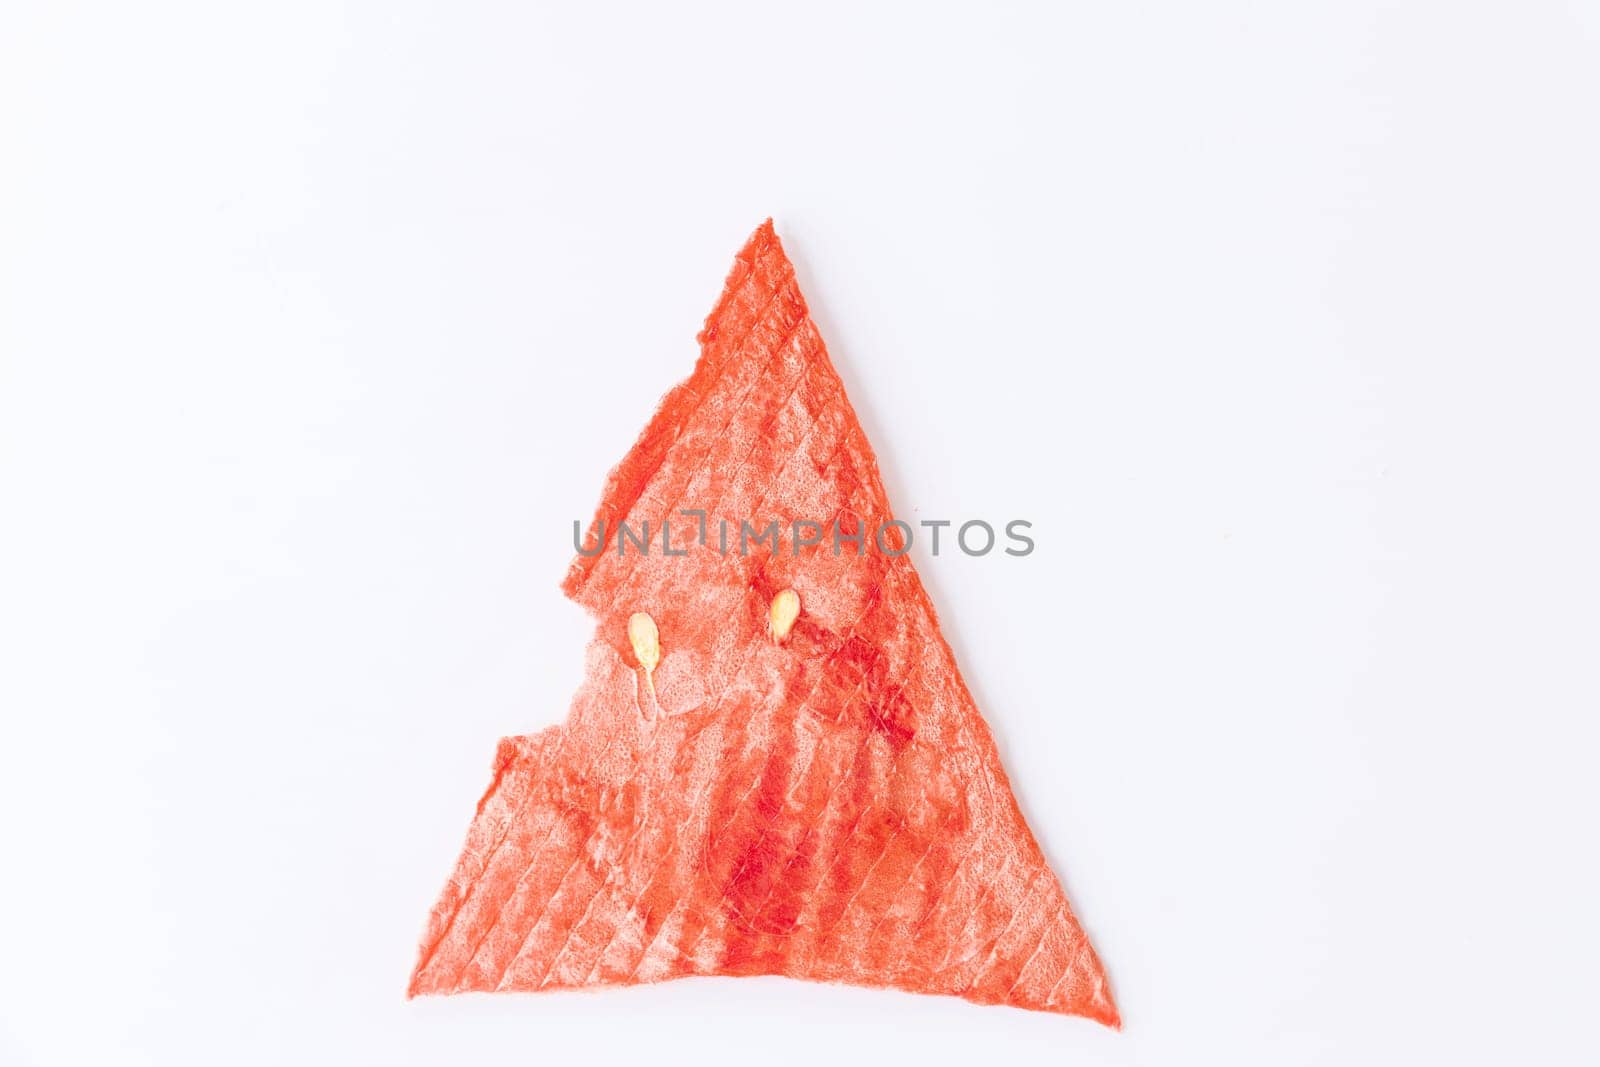 triangular slice of dried red, ripe watermelon. fruit chips on white background. healthy sweets concept, diet, isolate by Leoschka